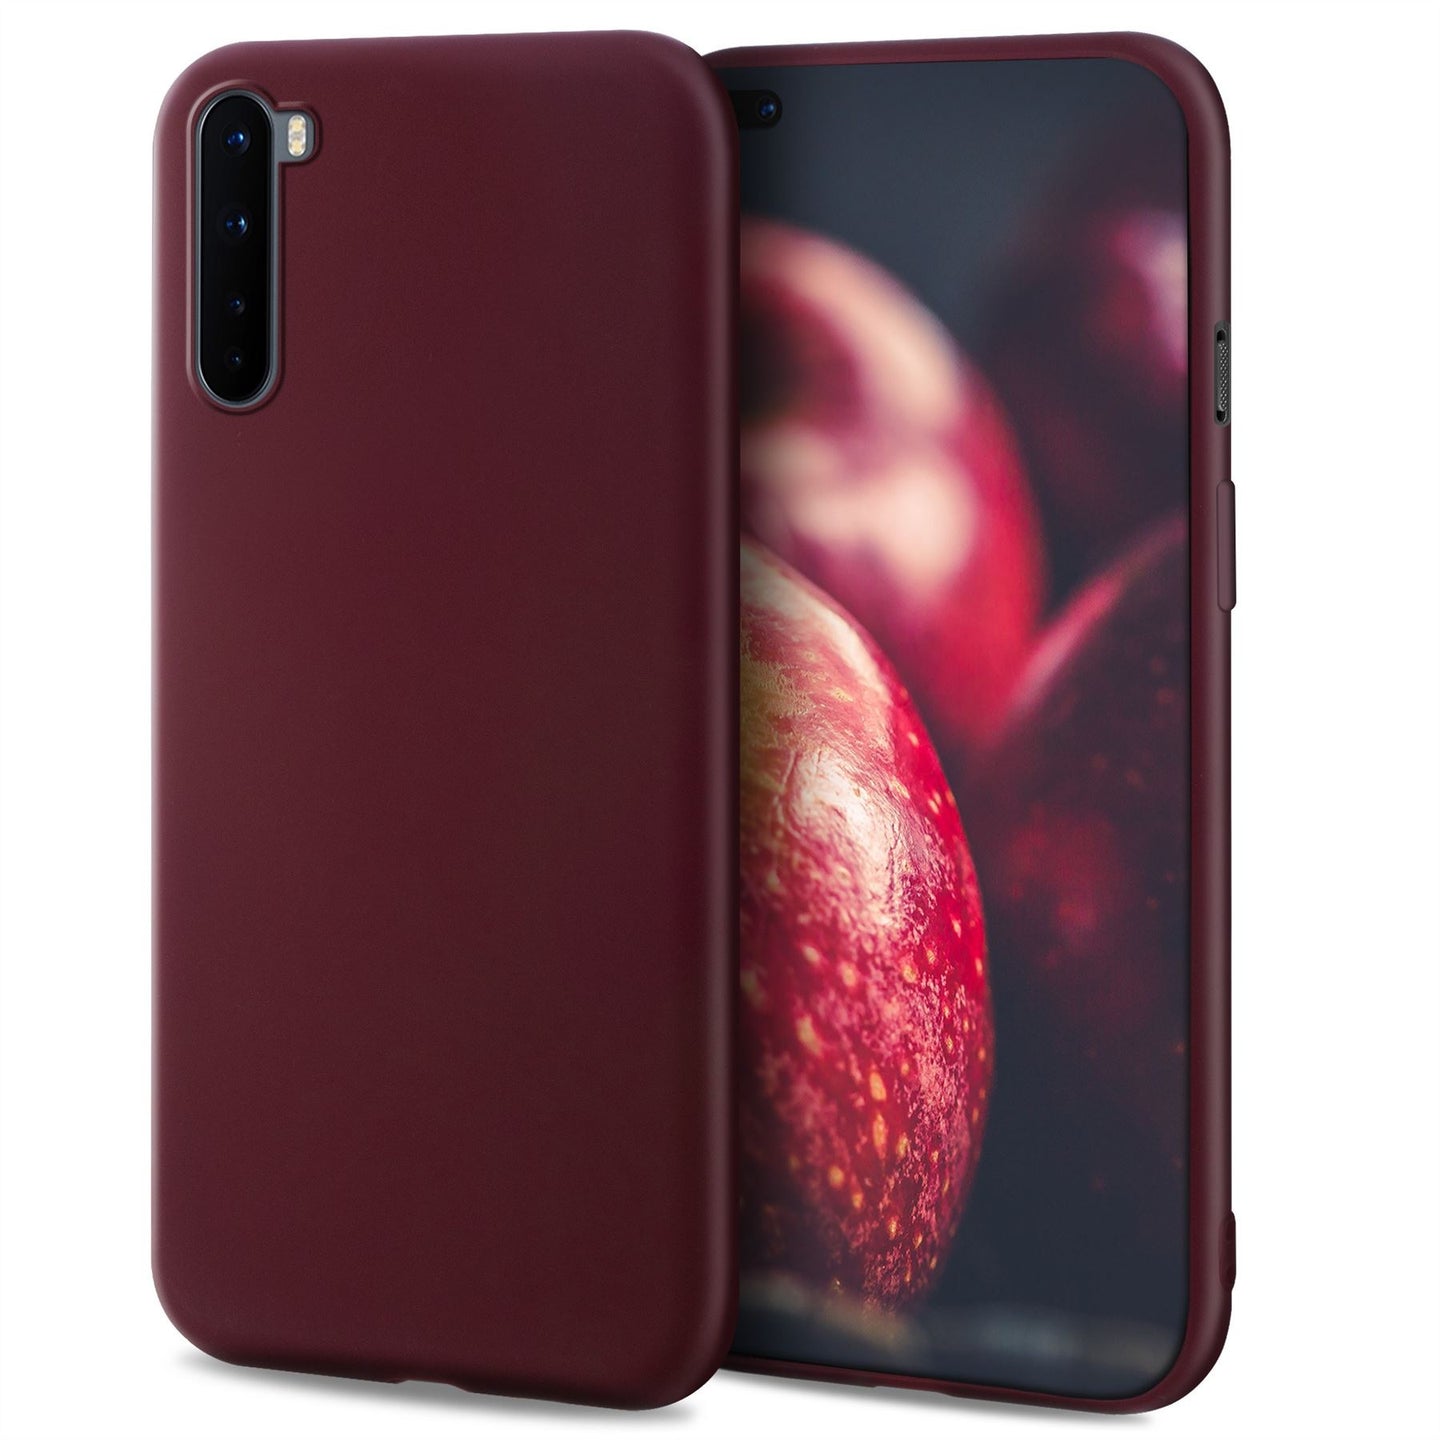 Moozy Minimalist Series Silicone Case for OnePlus Nord, Wine Red - Matte Finish Slim Soft TPU Cover